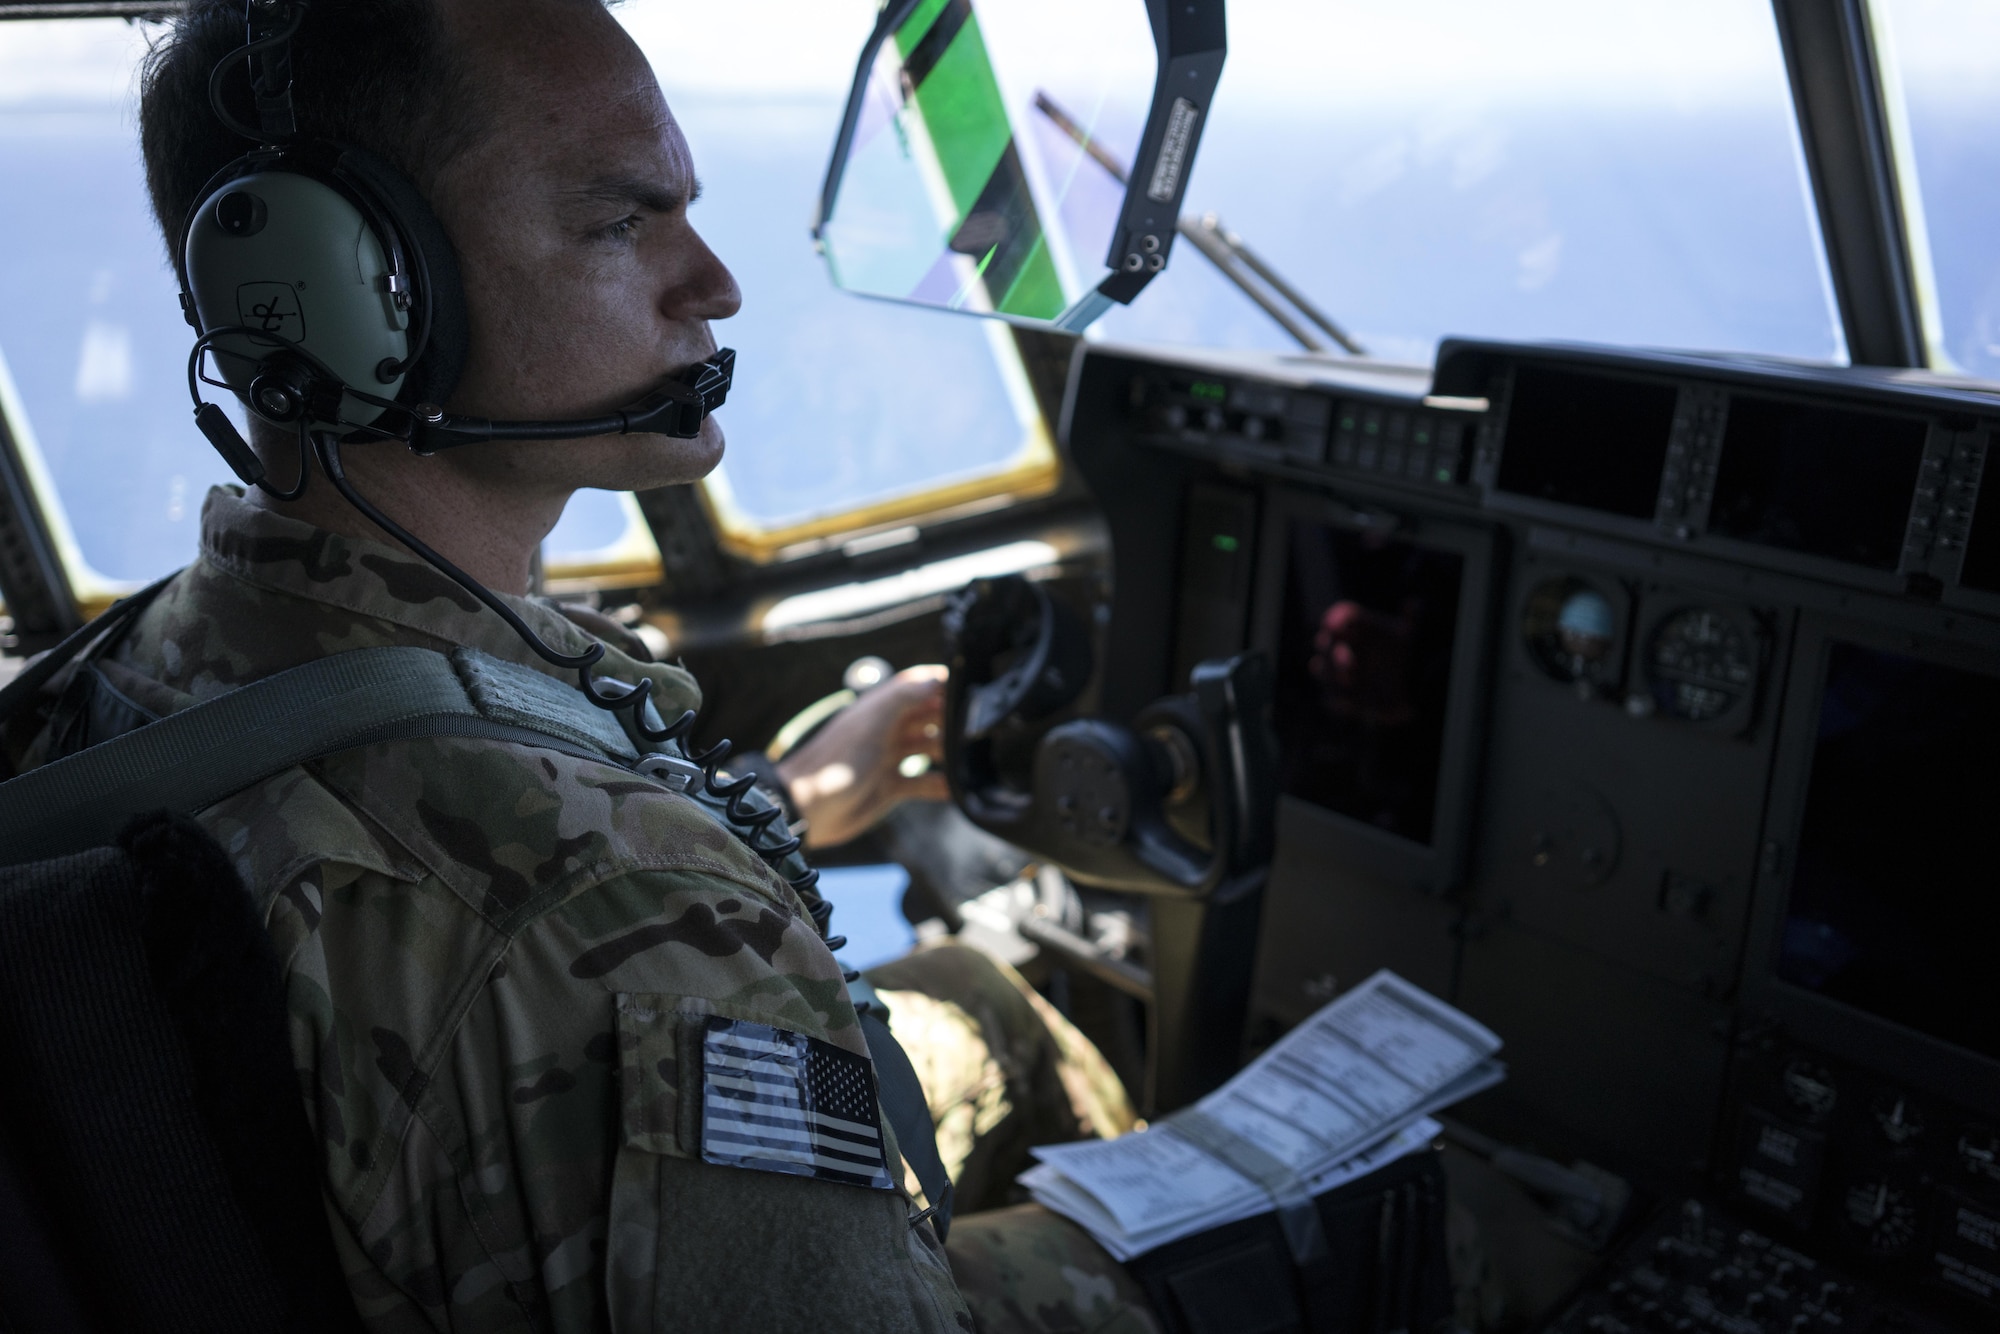 A U.S. Air Force MC-130J Commando II pilot assigned to the 17th Special Operations Squadron flies the Commando II during a mass launch training mission June 22, 2017, off the coast of Okinawa, Japan. Airmen from the 17th SOS conduct training operations often to ensure they are always ready perform a variety of high-priority, low-visibility missions throughout the Indo-Asia-Pacific-Region. (U.S. Air Force photo by Capt. Jessica Tait)